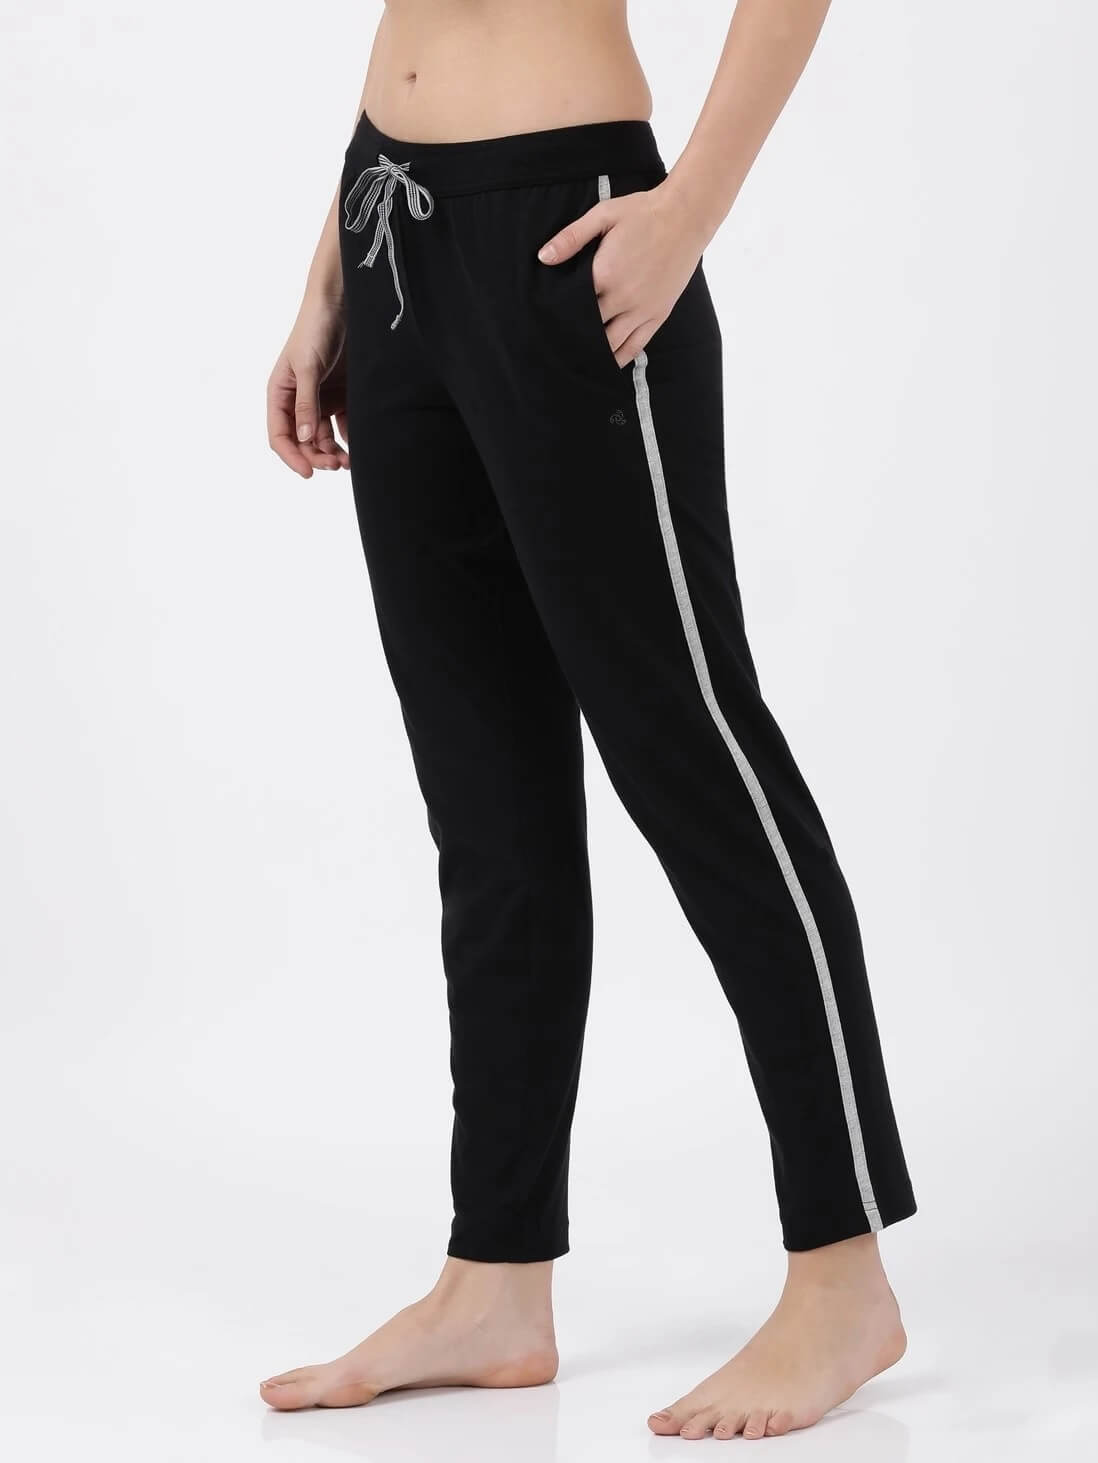 Jockey Women's Cotton Contrast Side Piping and Pockets Track pant -1305 –  Online Shopping site in India